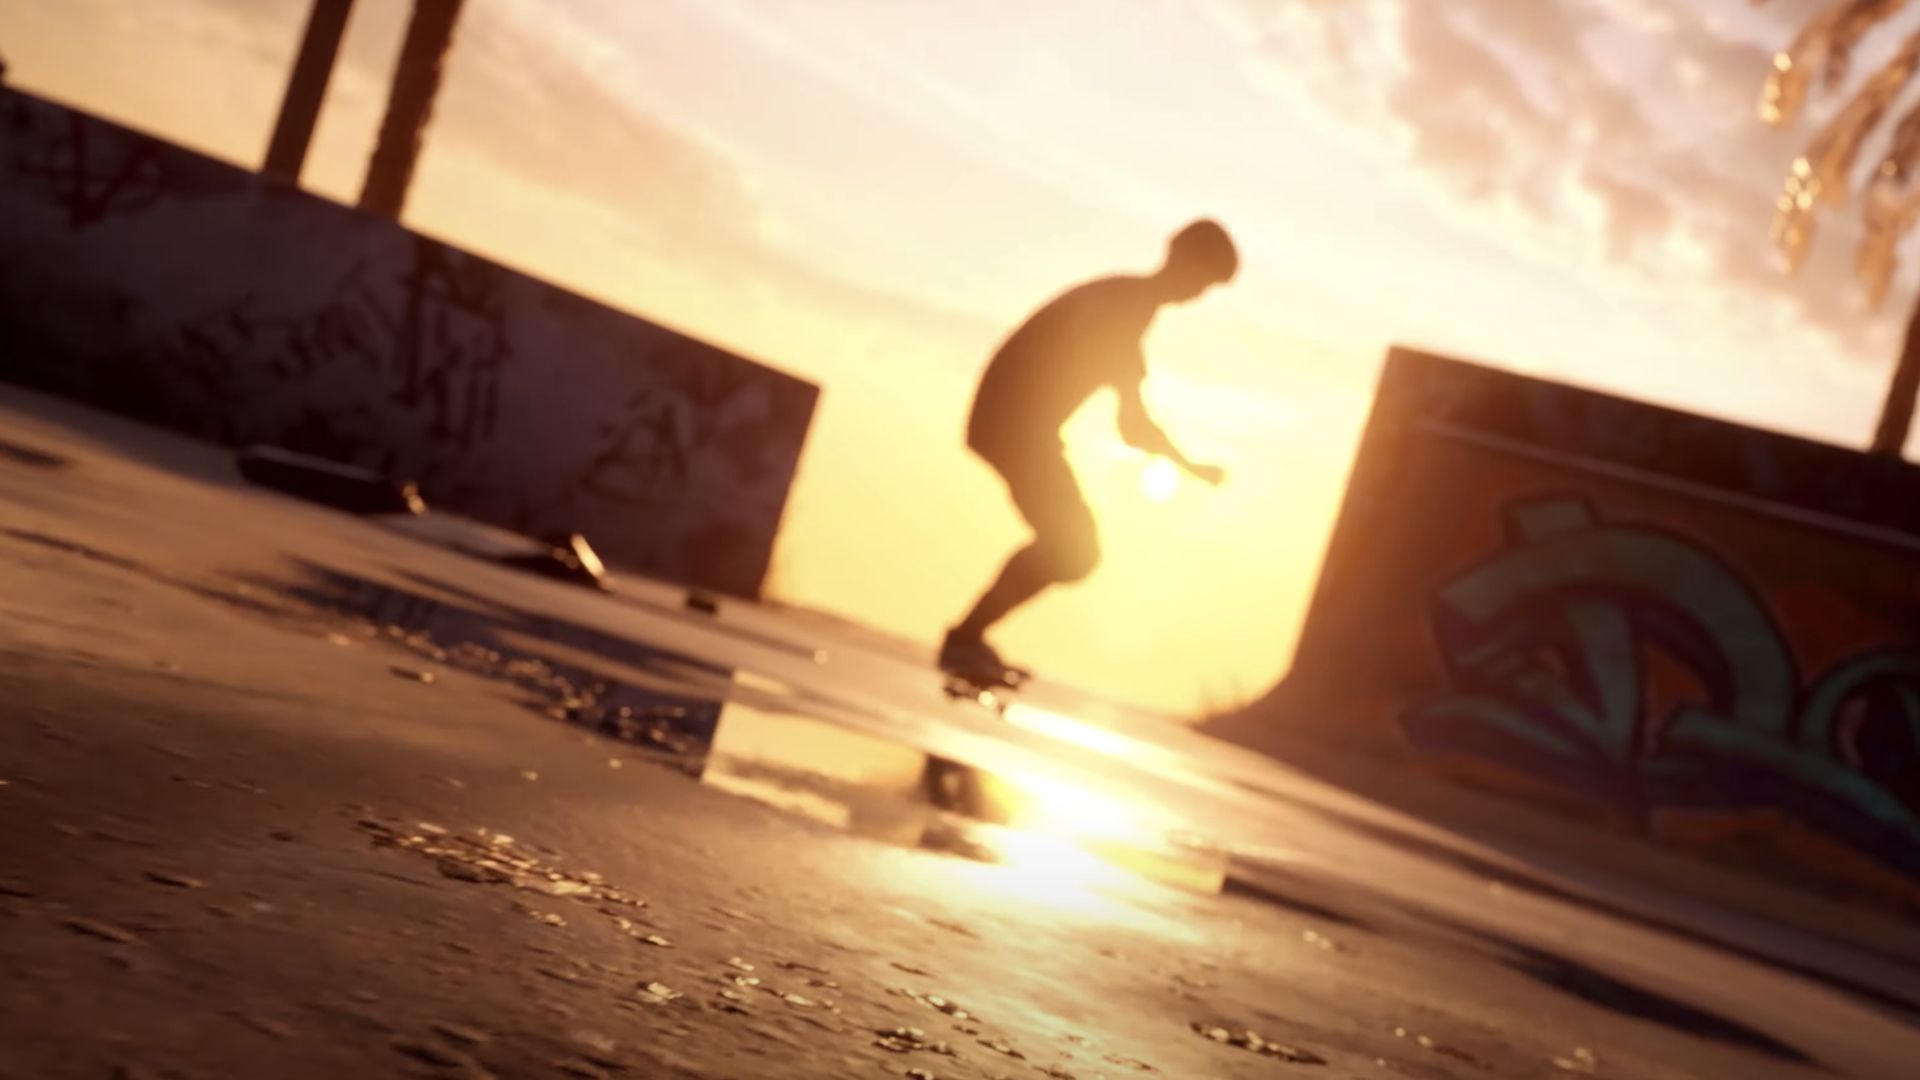 Tony Hawk's Pro Skater 1 and 2 Video Goes Behind the Scenes With